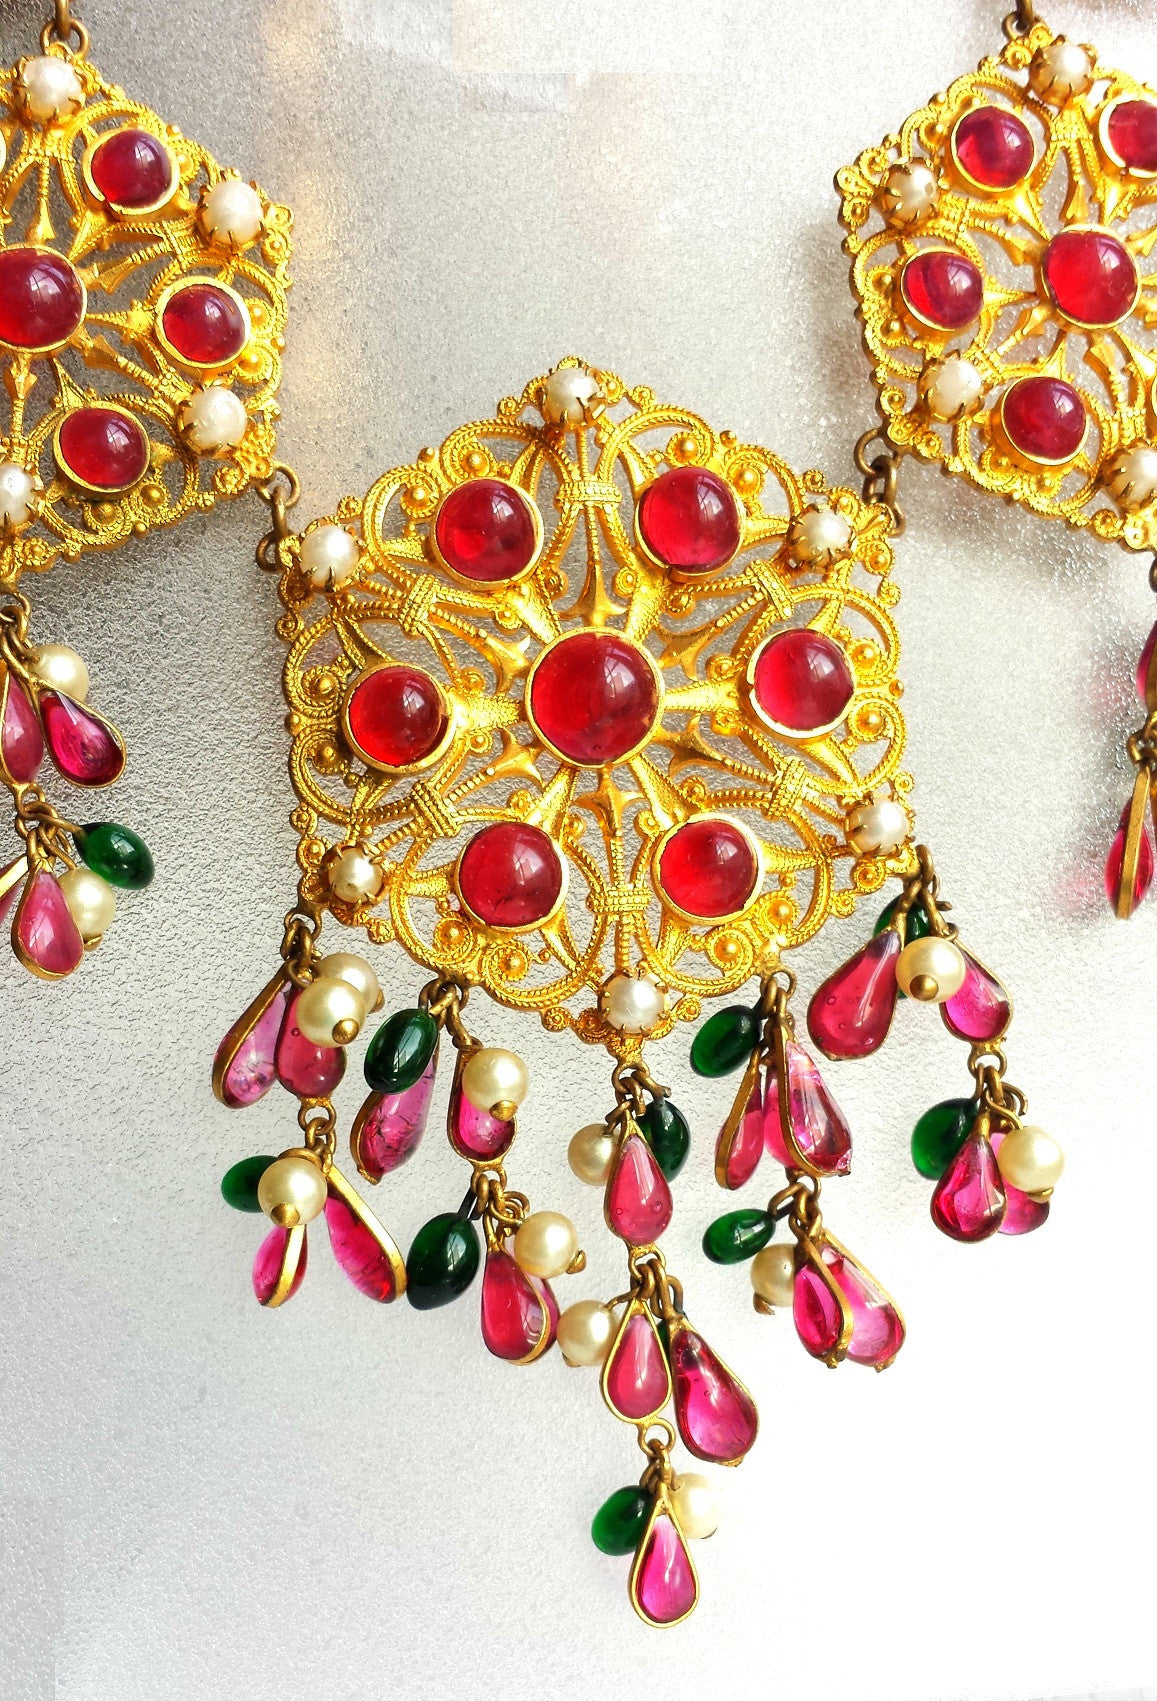 Mughal Jewellery in Chavakkad,Thrissur - Best Gold Jewellery Showrooms in  Thrissur - Justdial